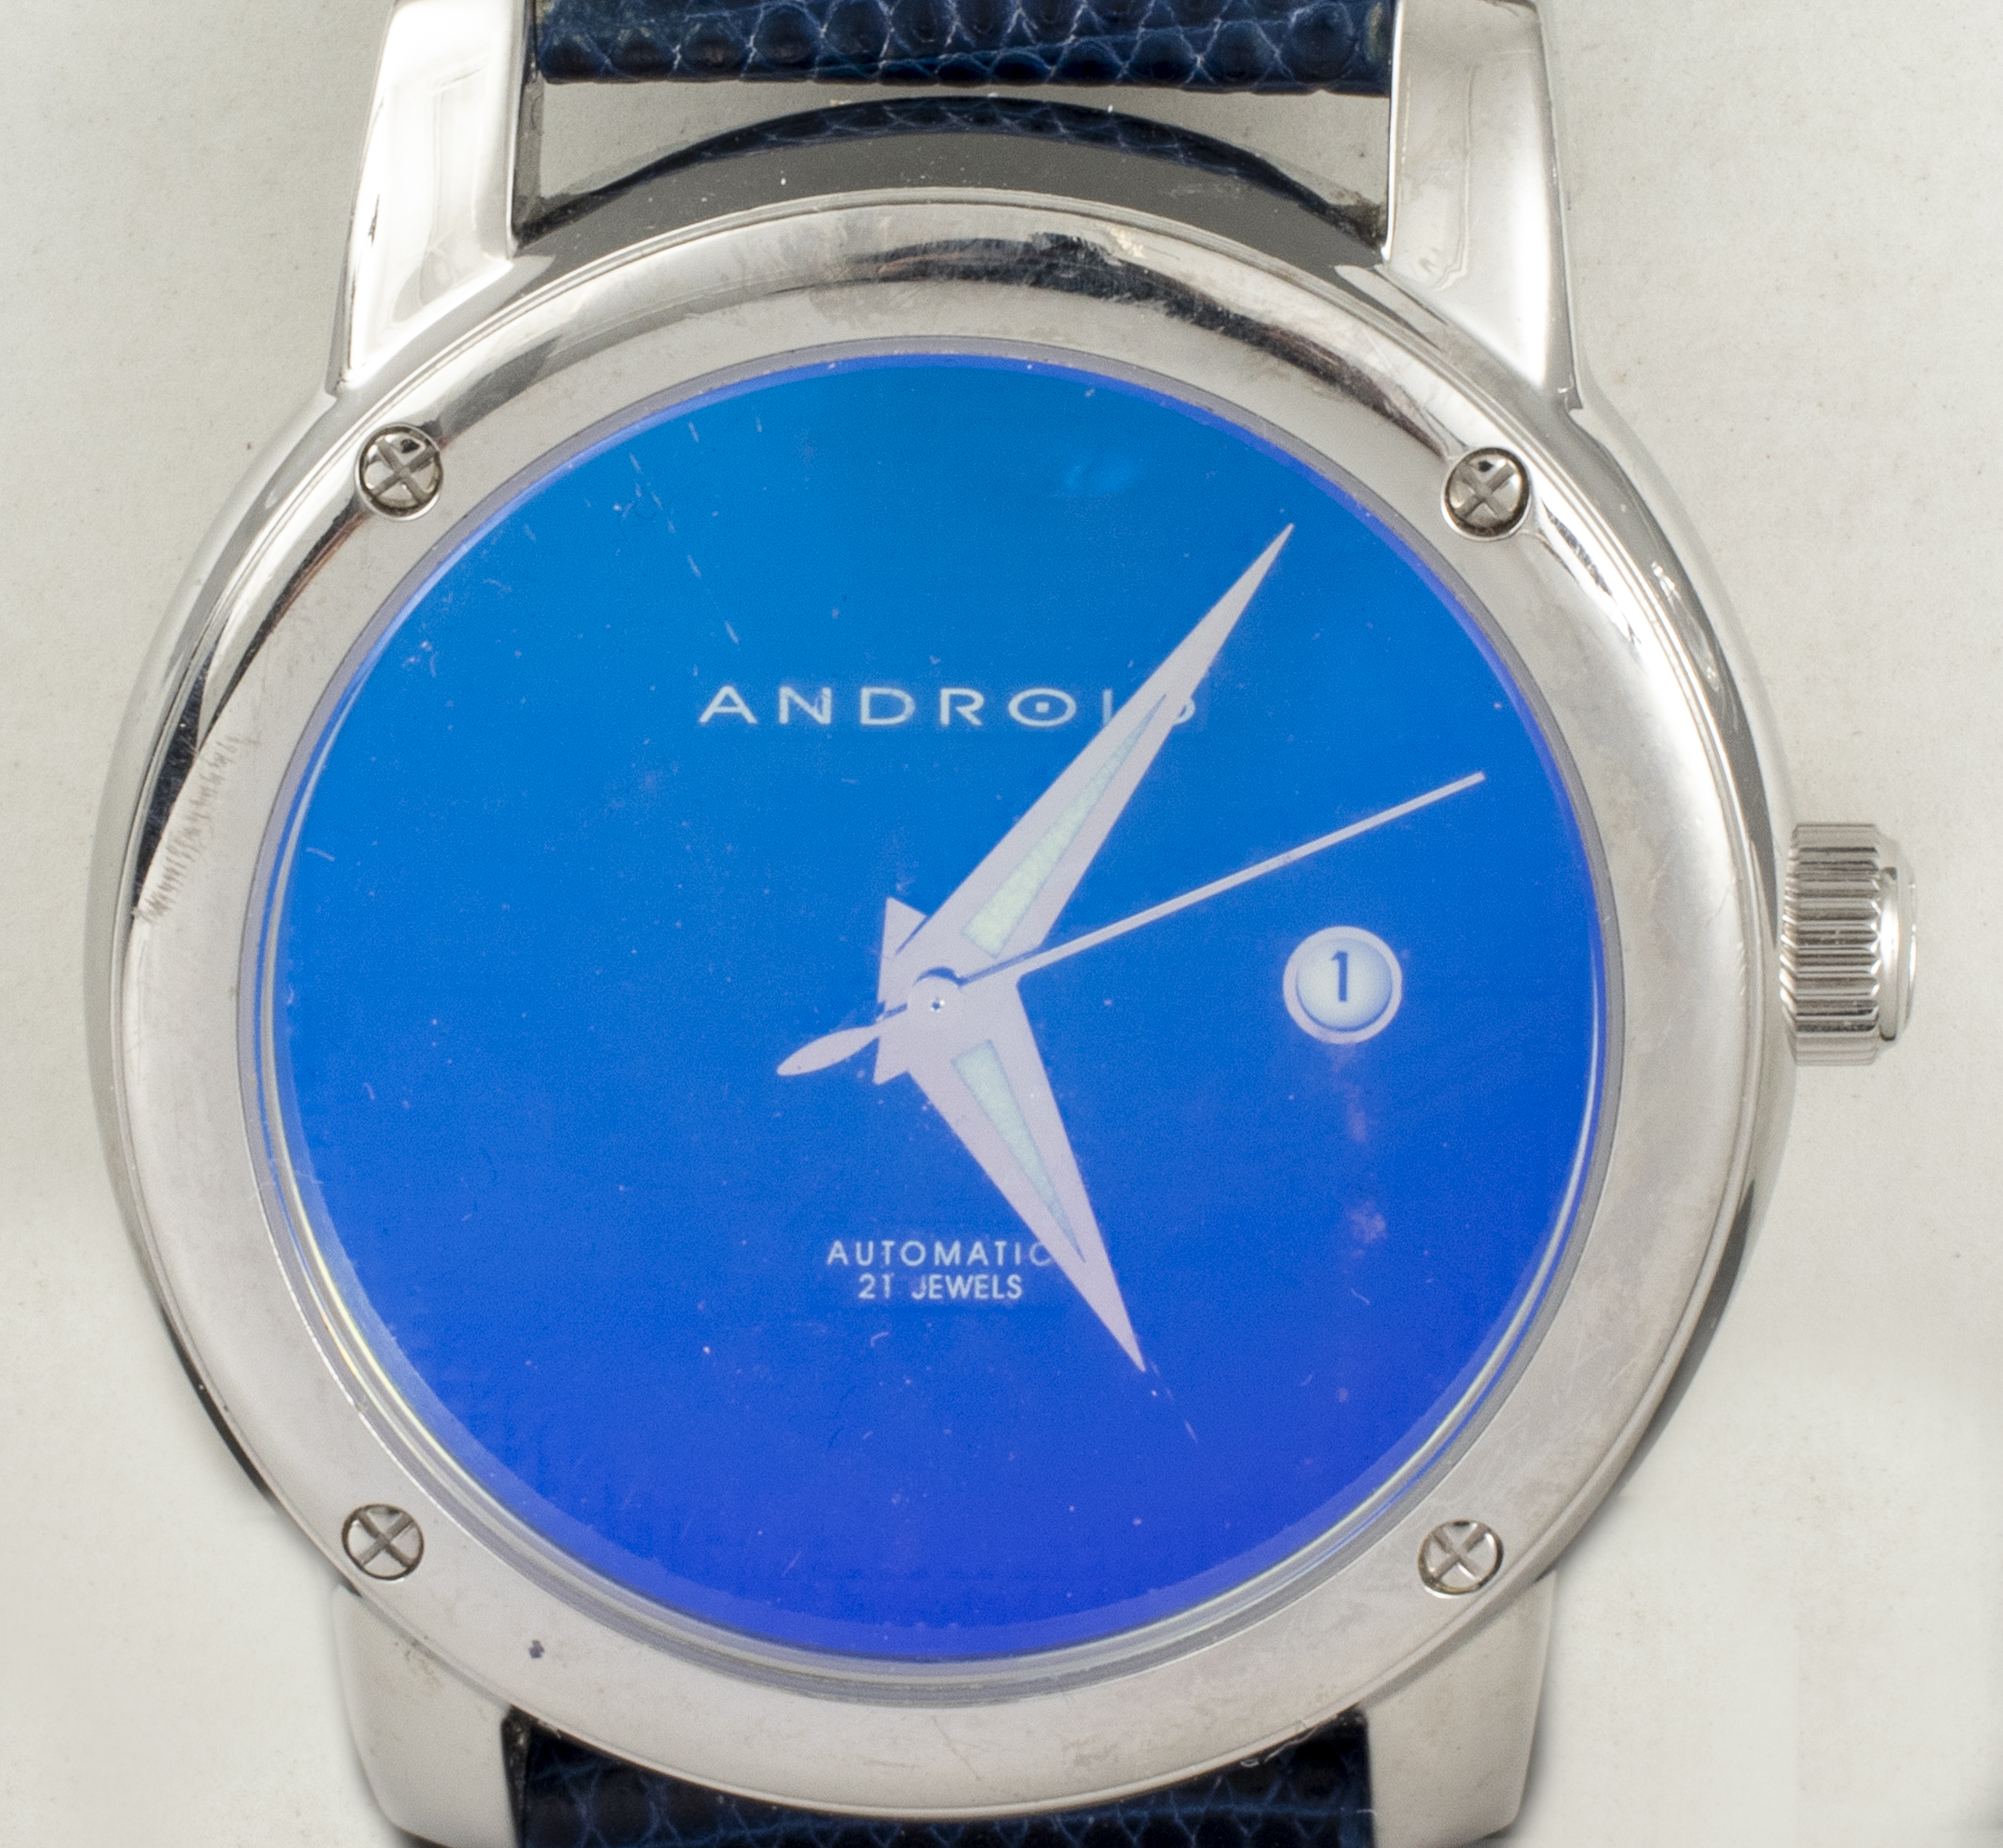 ANDROID AUTOMATIC WATCH AD305 3c4d0b